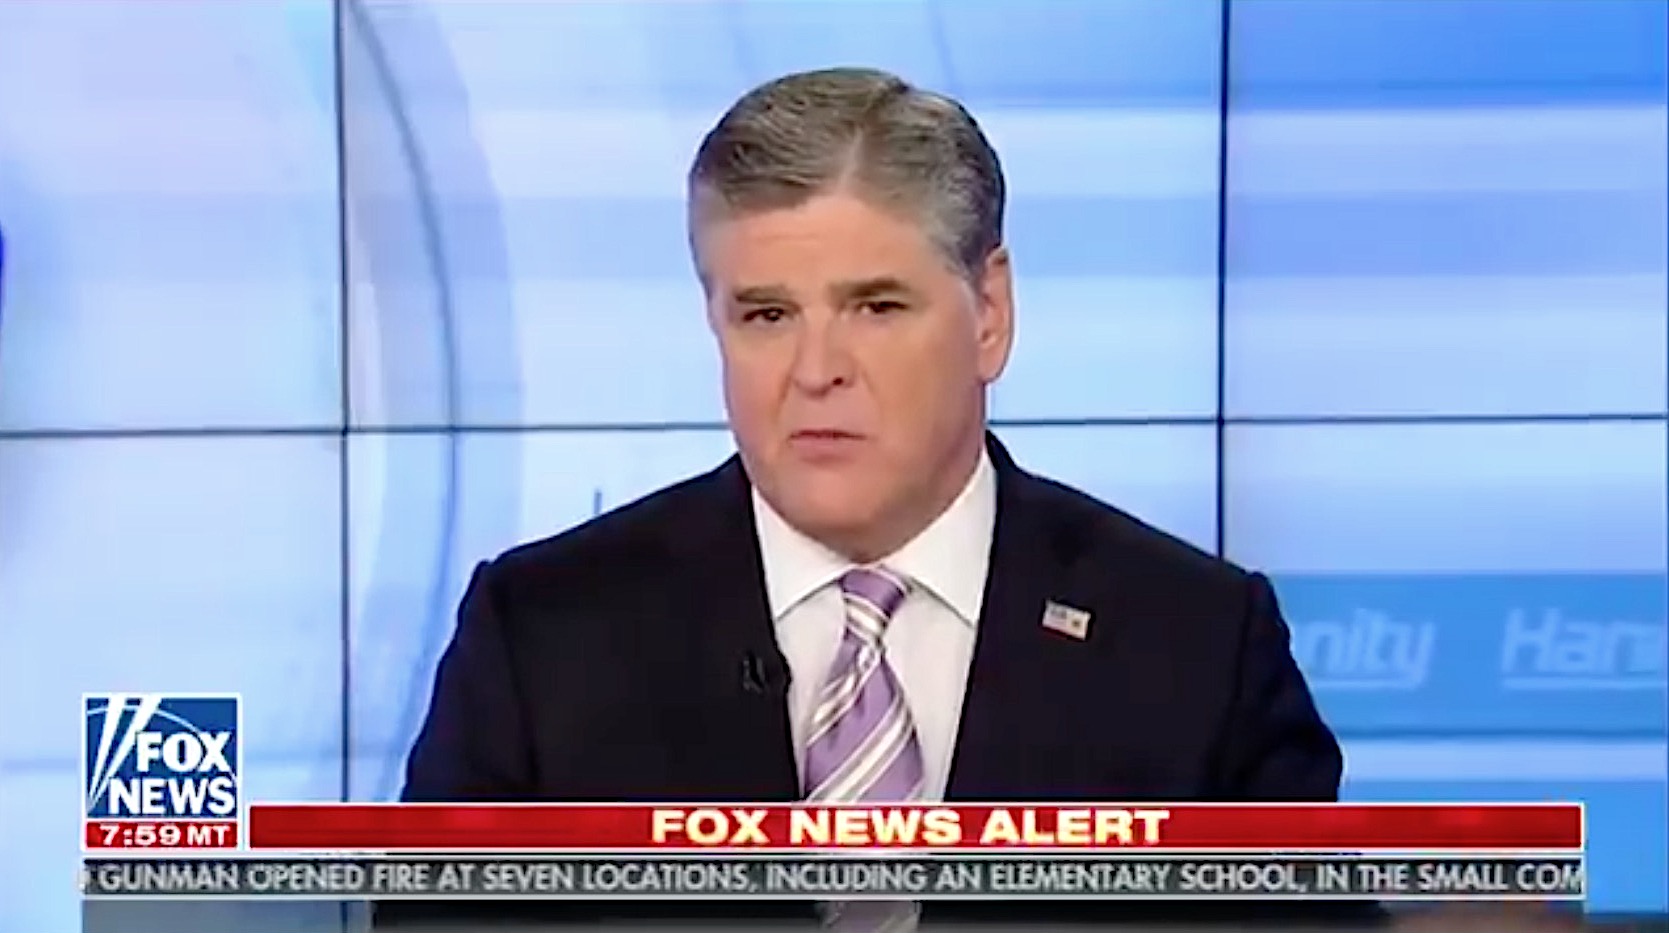 Sean Hannity gives Roy Moore an ultimatum